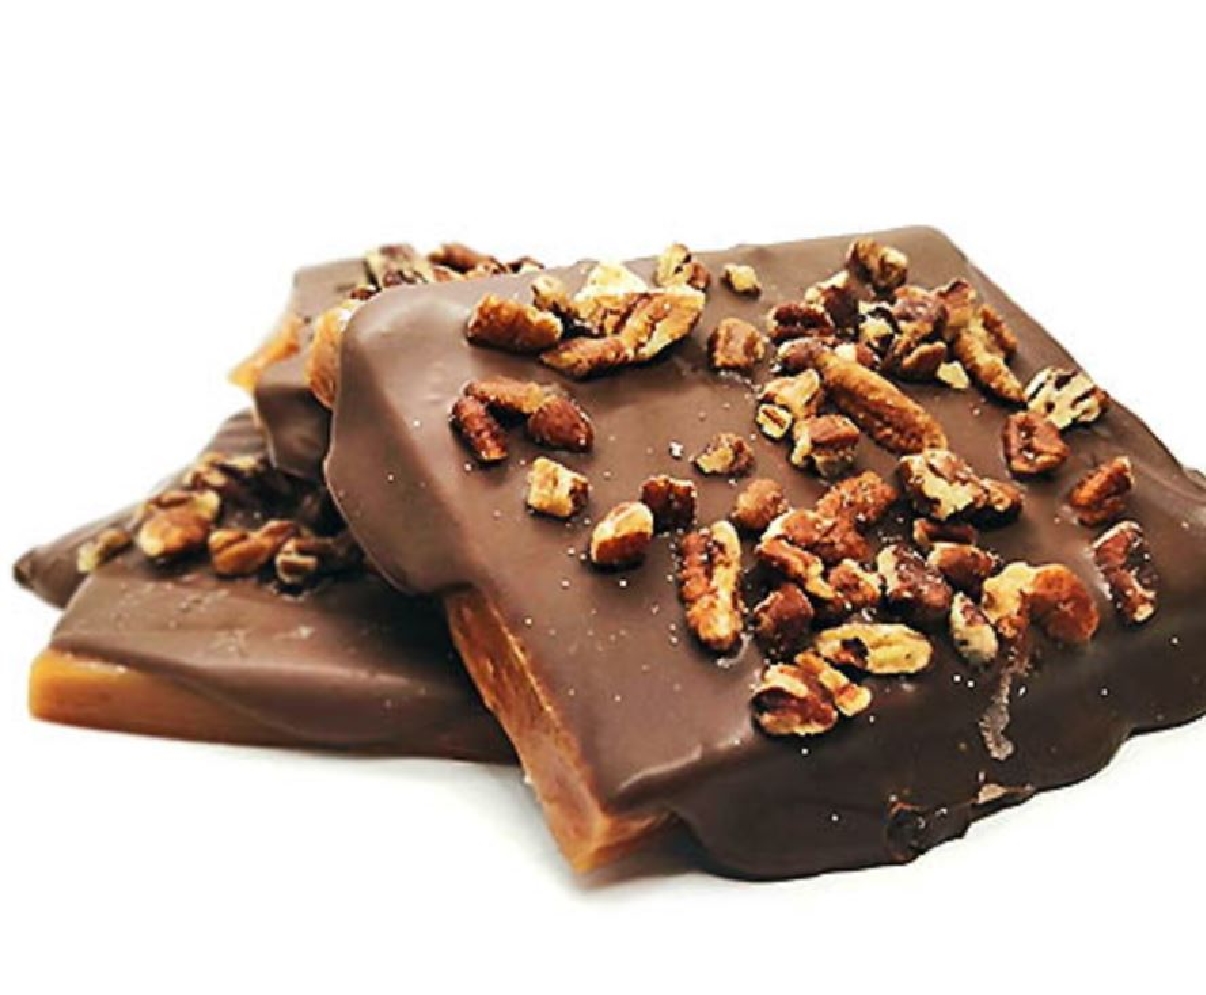 Templeman s Toffee - Loaded Chewy Toffee

Our...